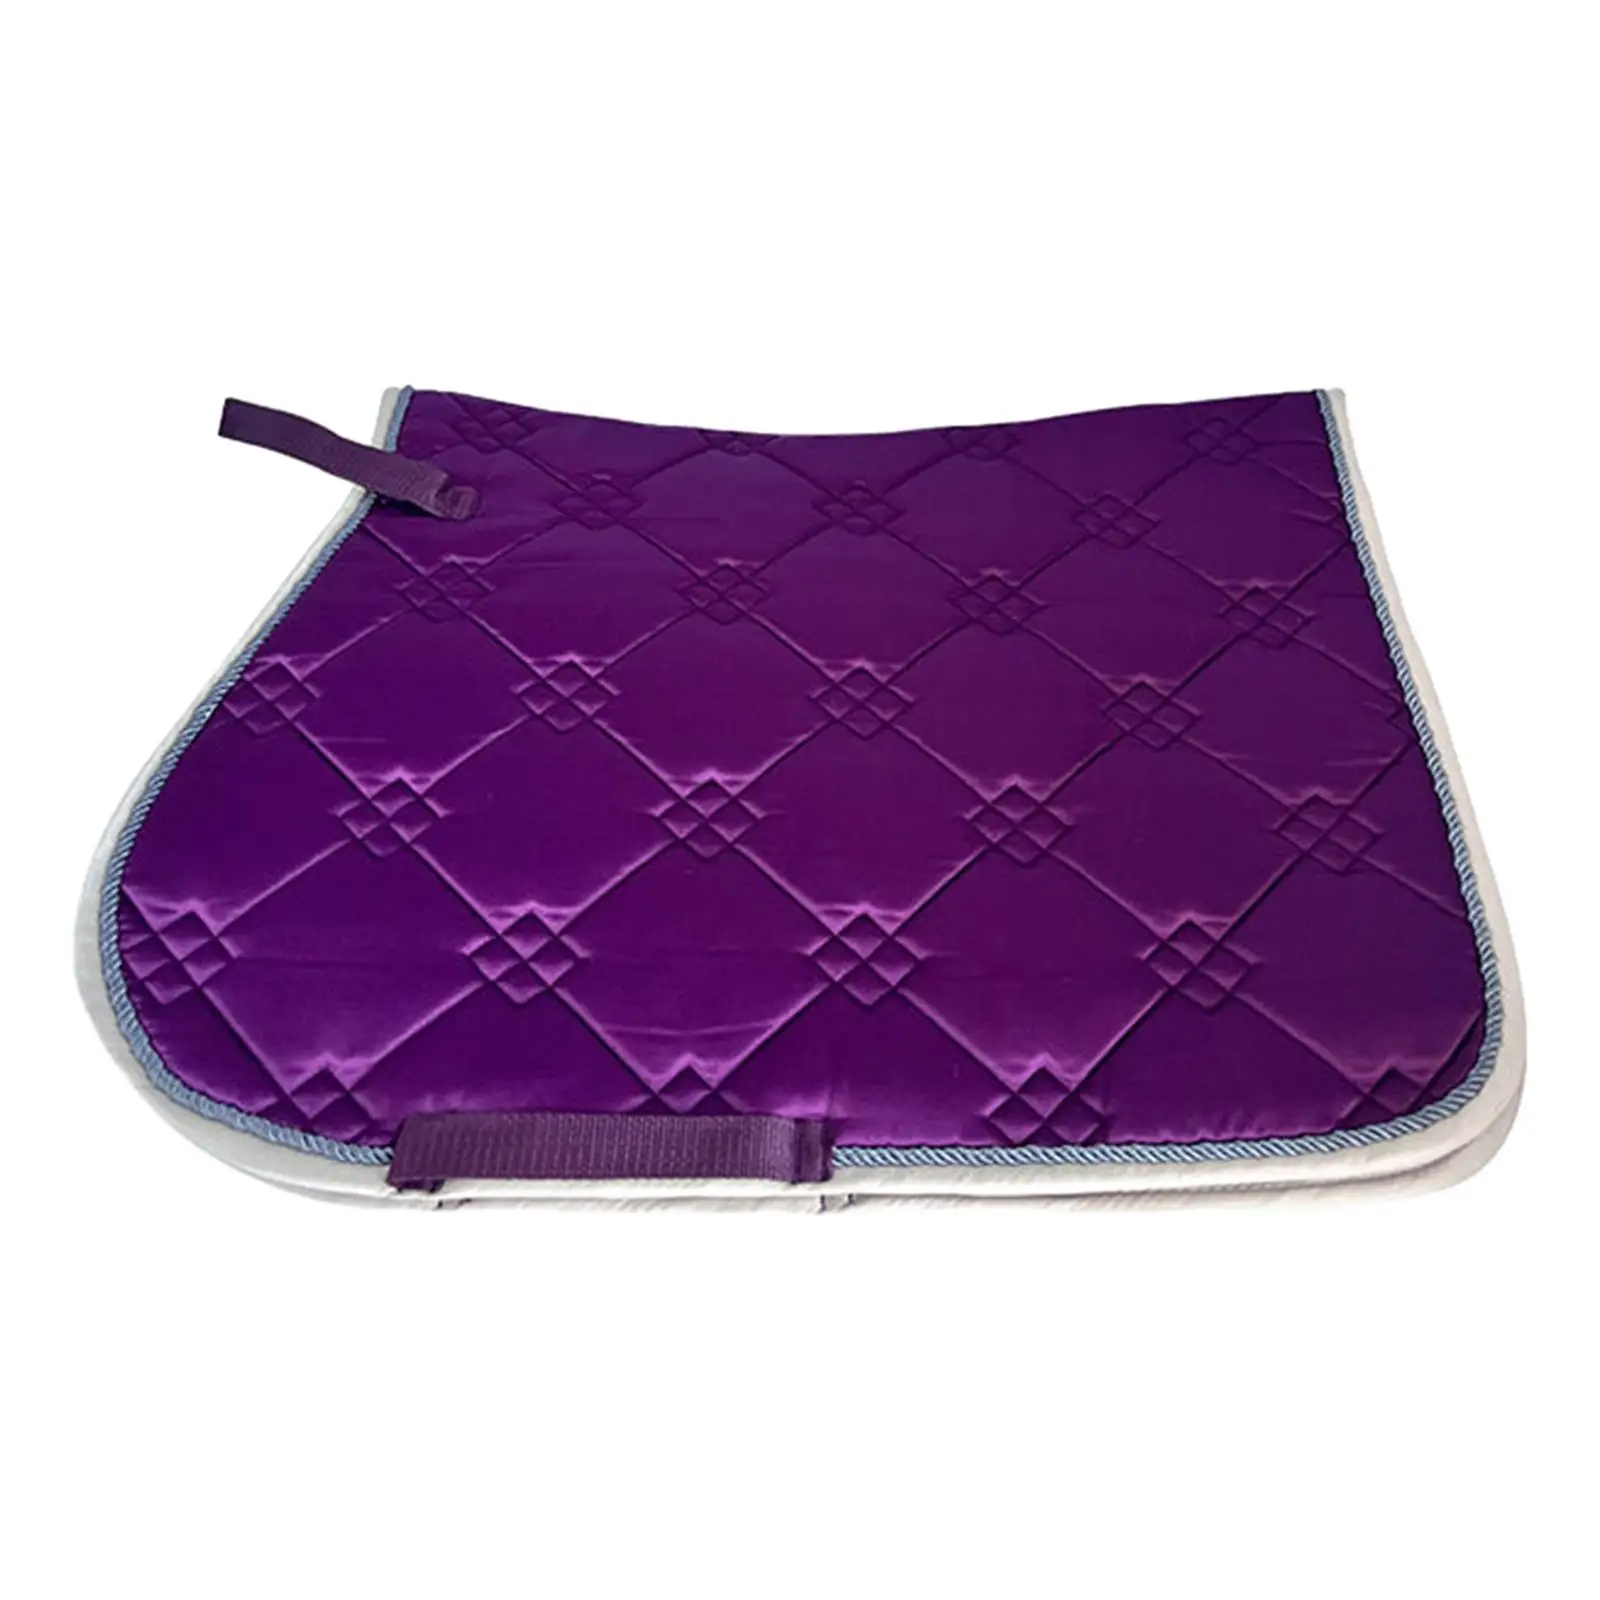 Saddle Pad for Horse Equestrian Riding Equipment Sports Riding Soft Nonslip